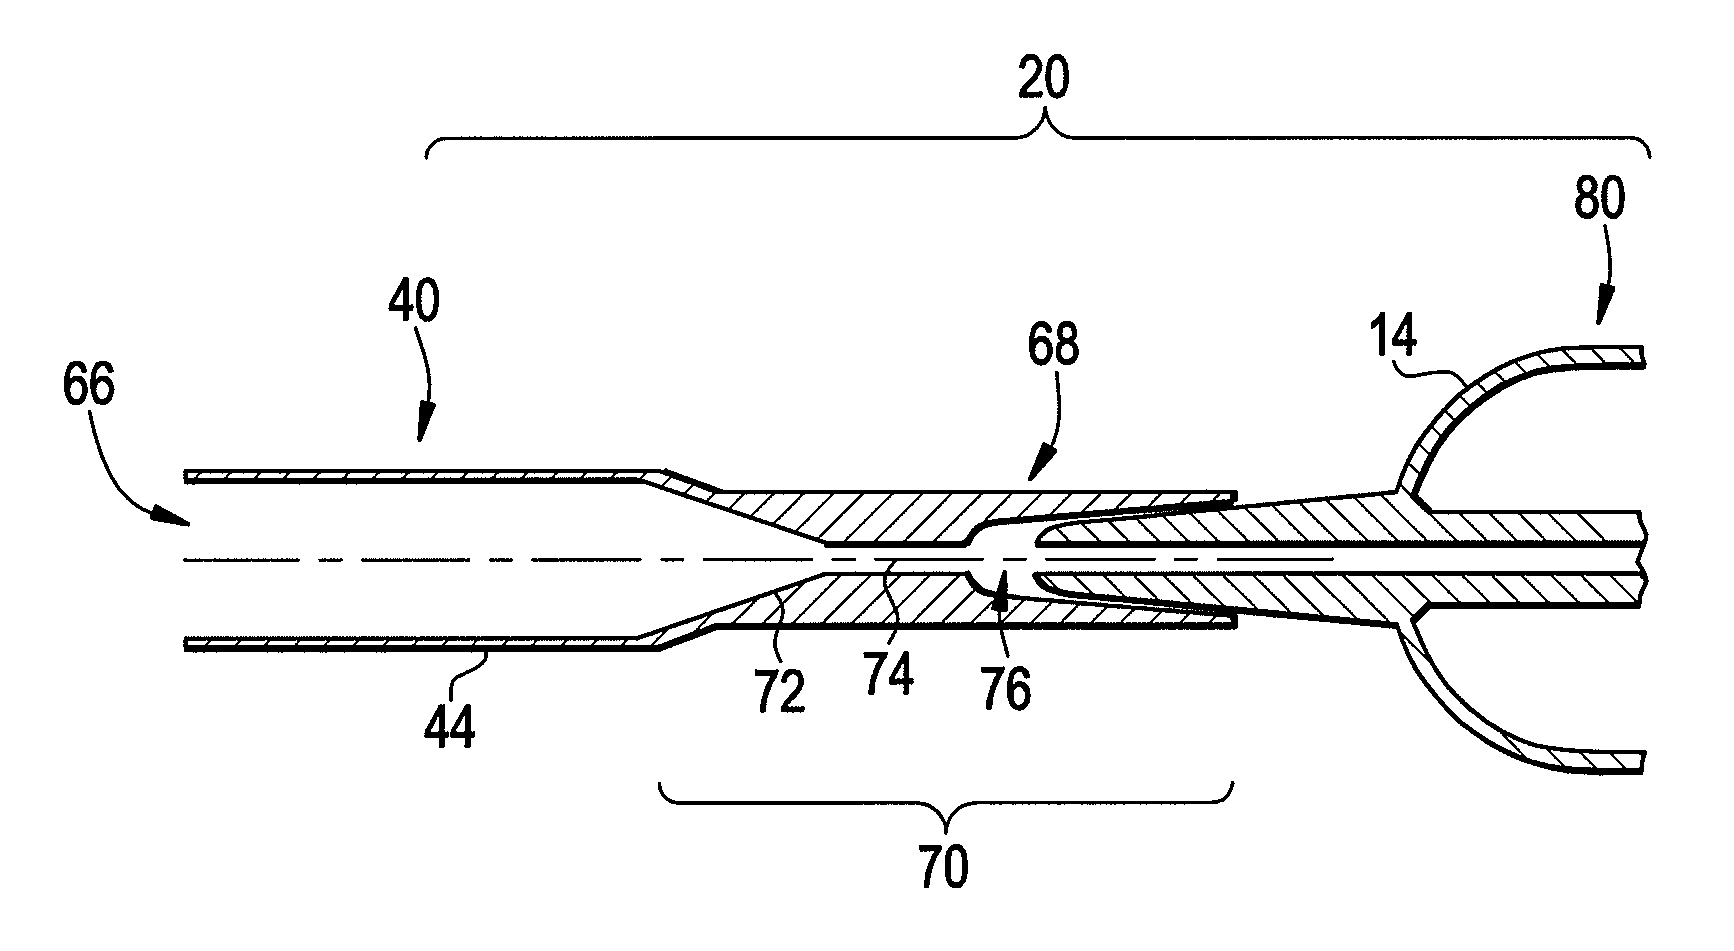 Catheter with removable filter retrieval tip